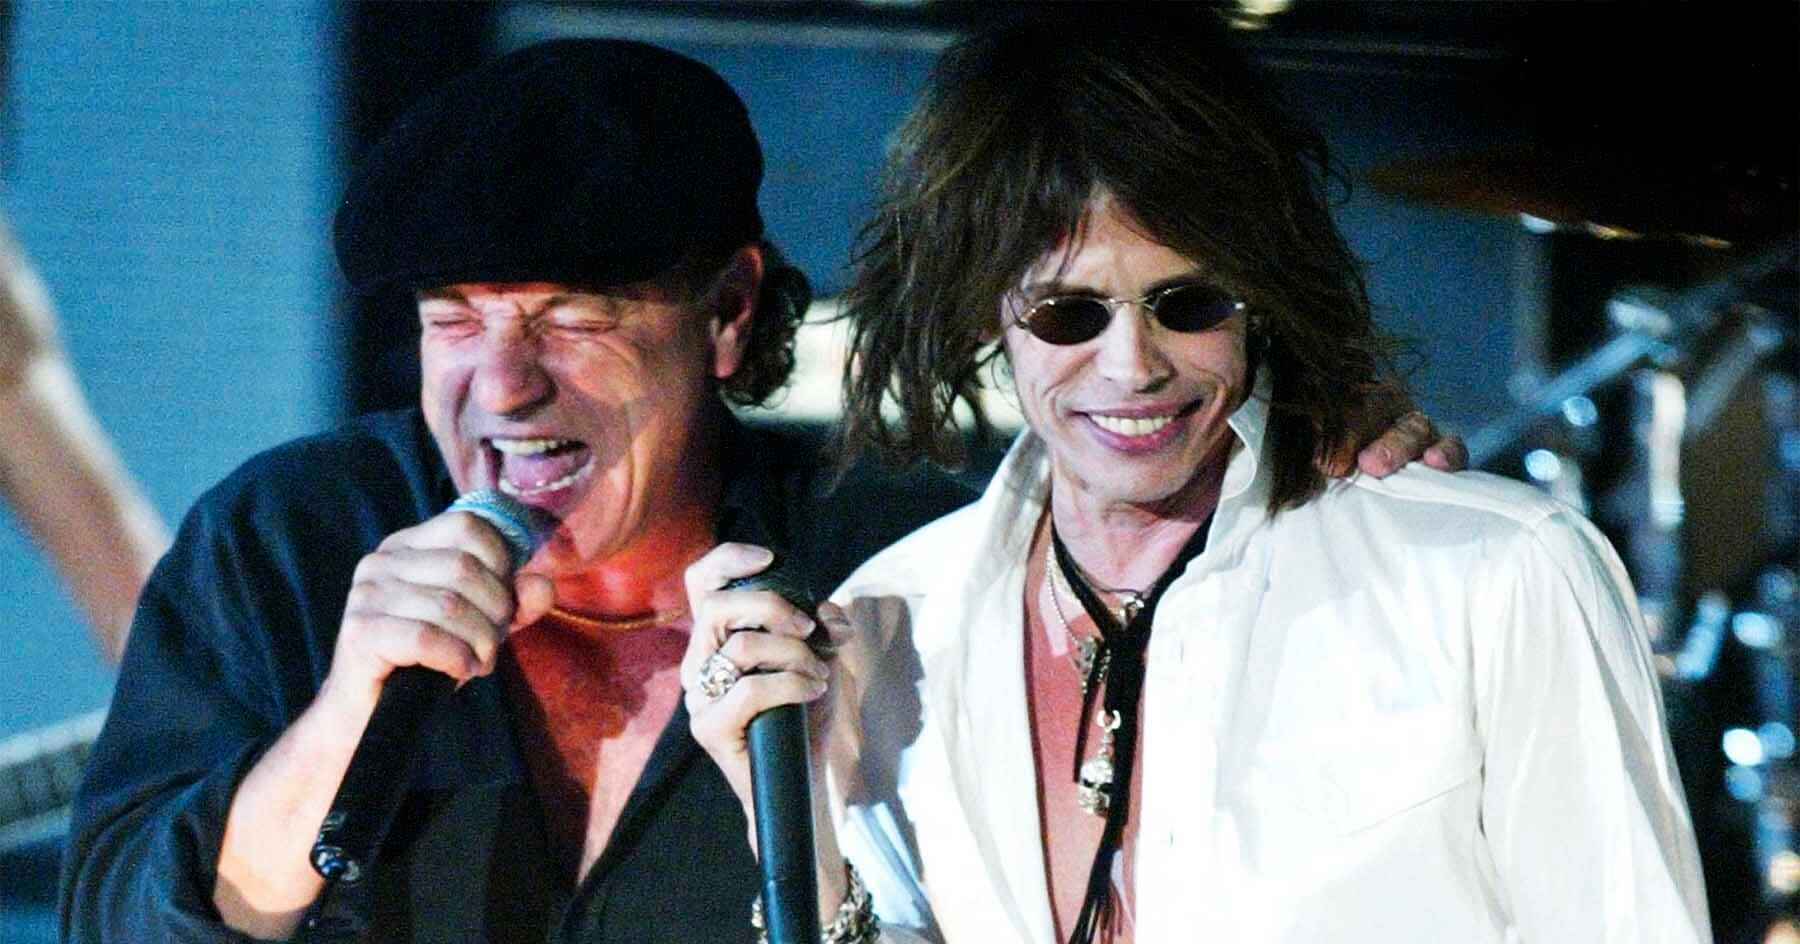 Back In Time: Steven Tyler and ACDC performing together